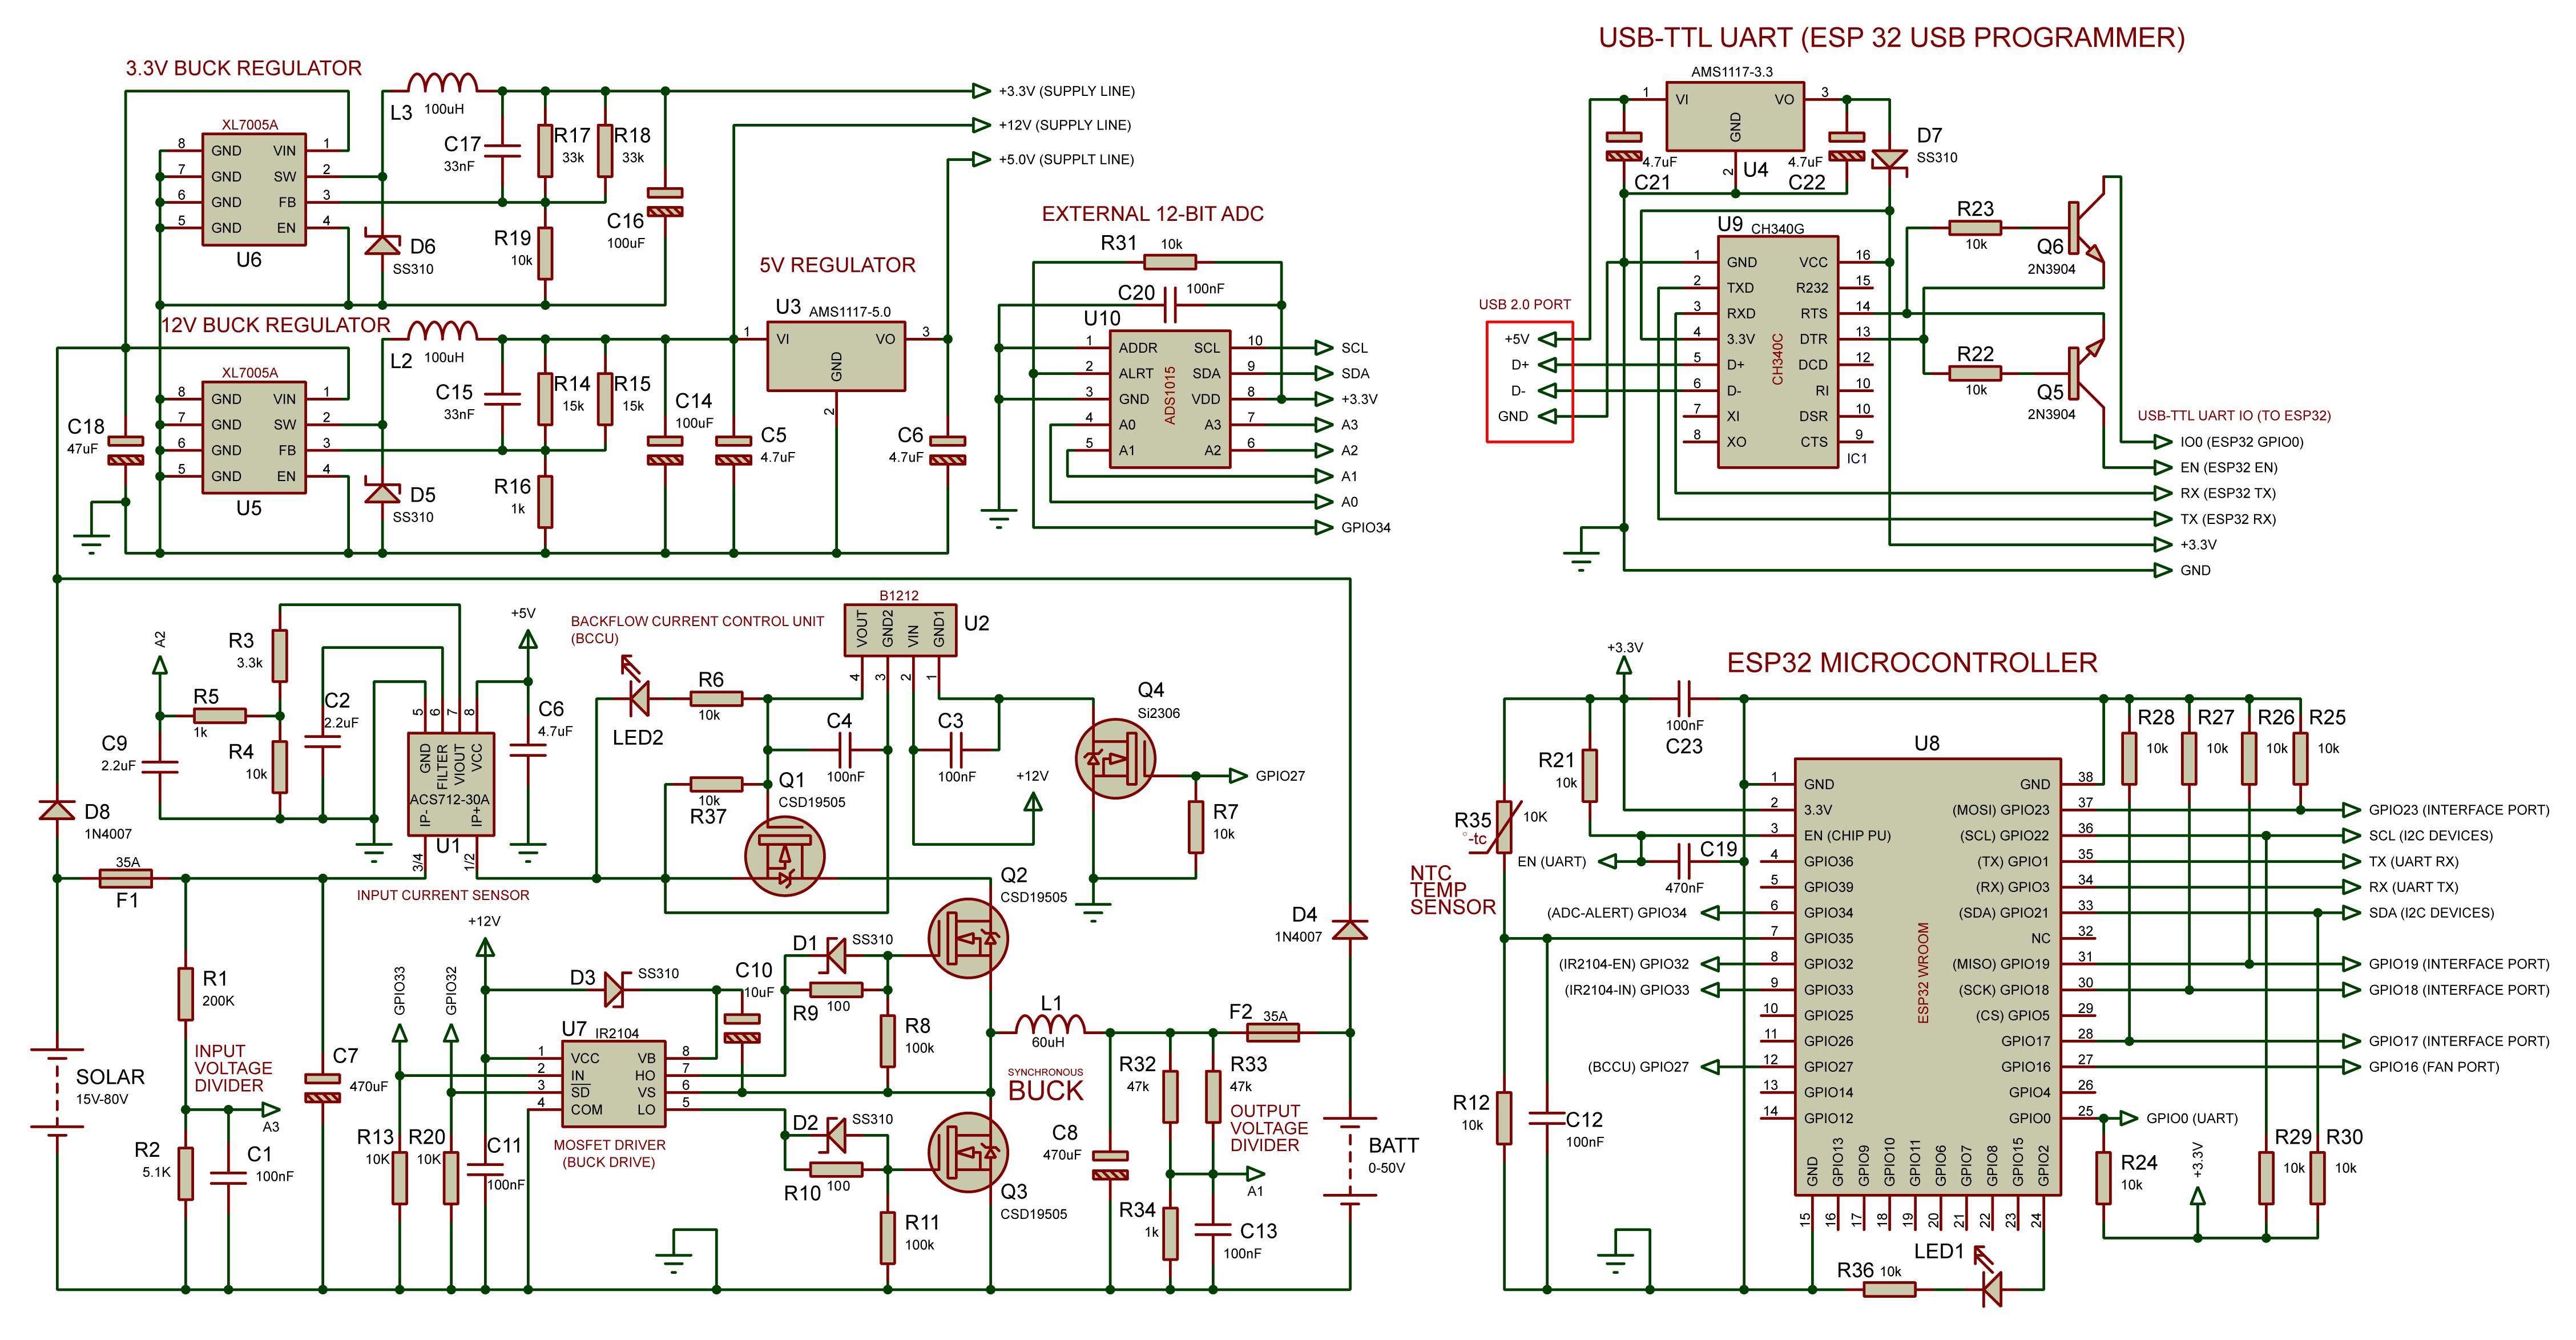 1 - MPPT Board Schematic.png